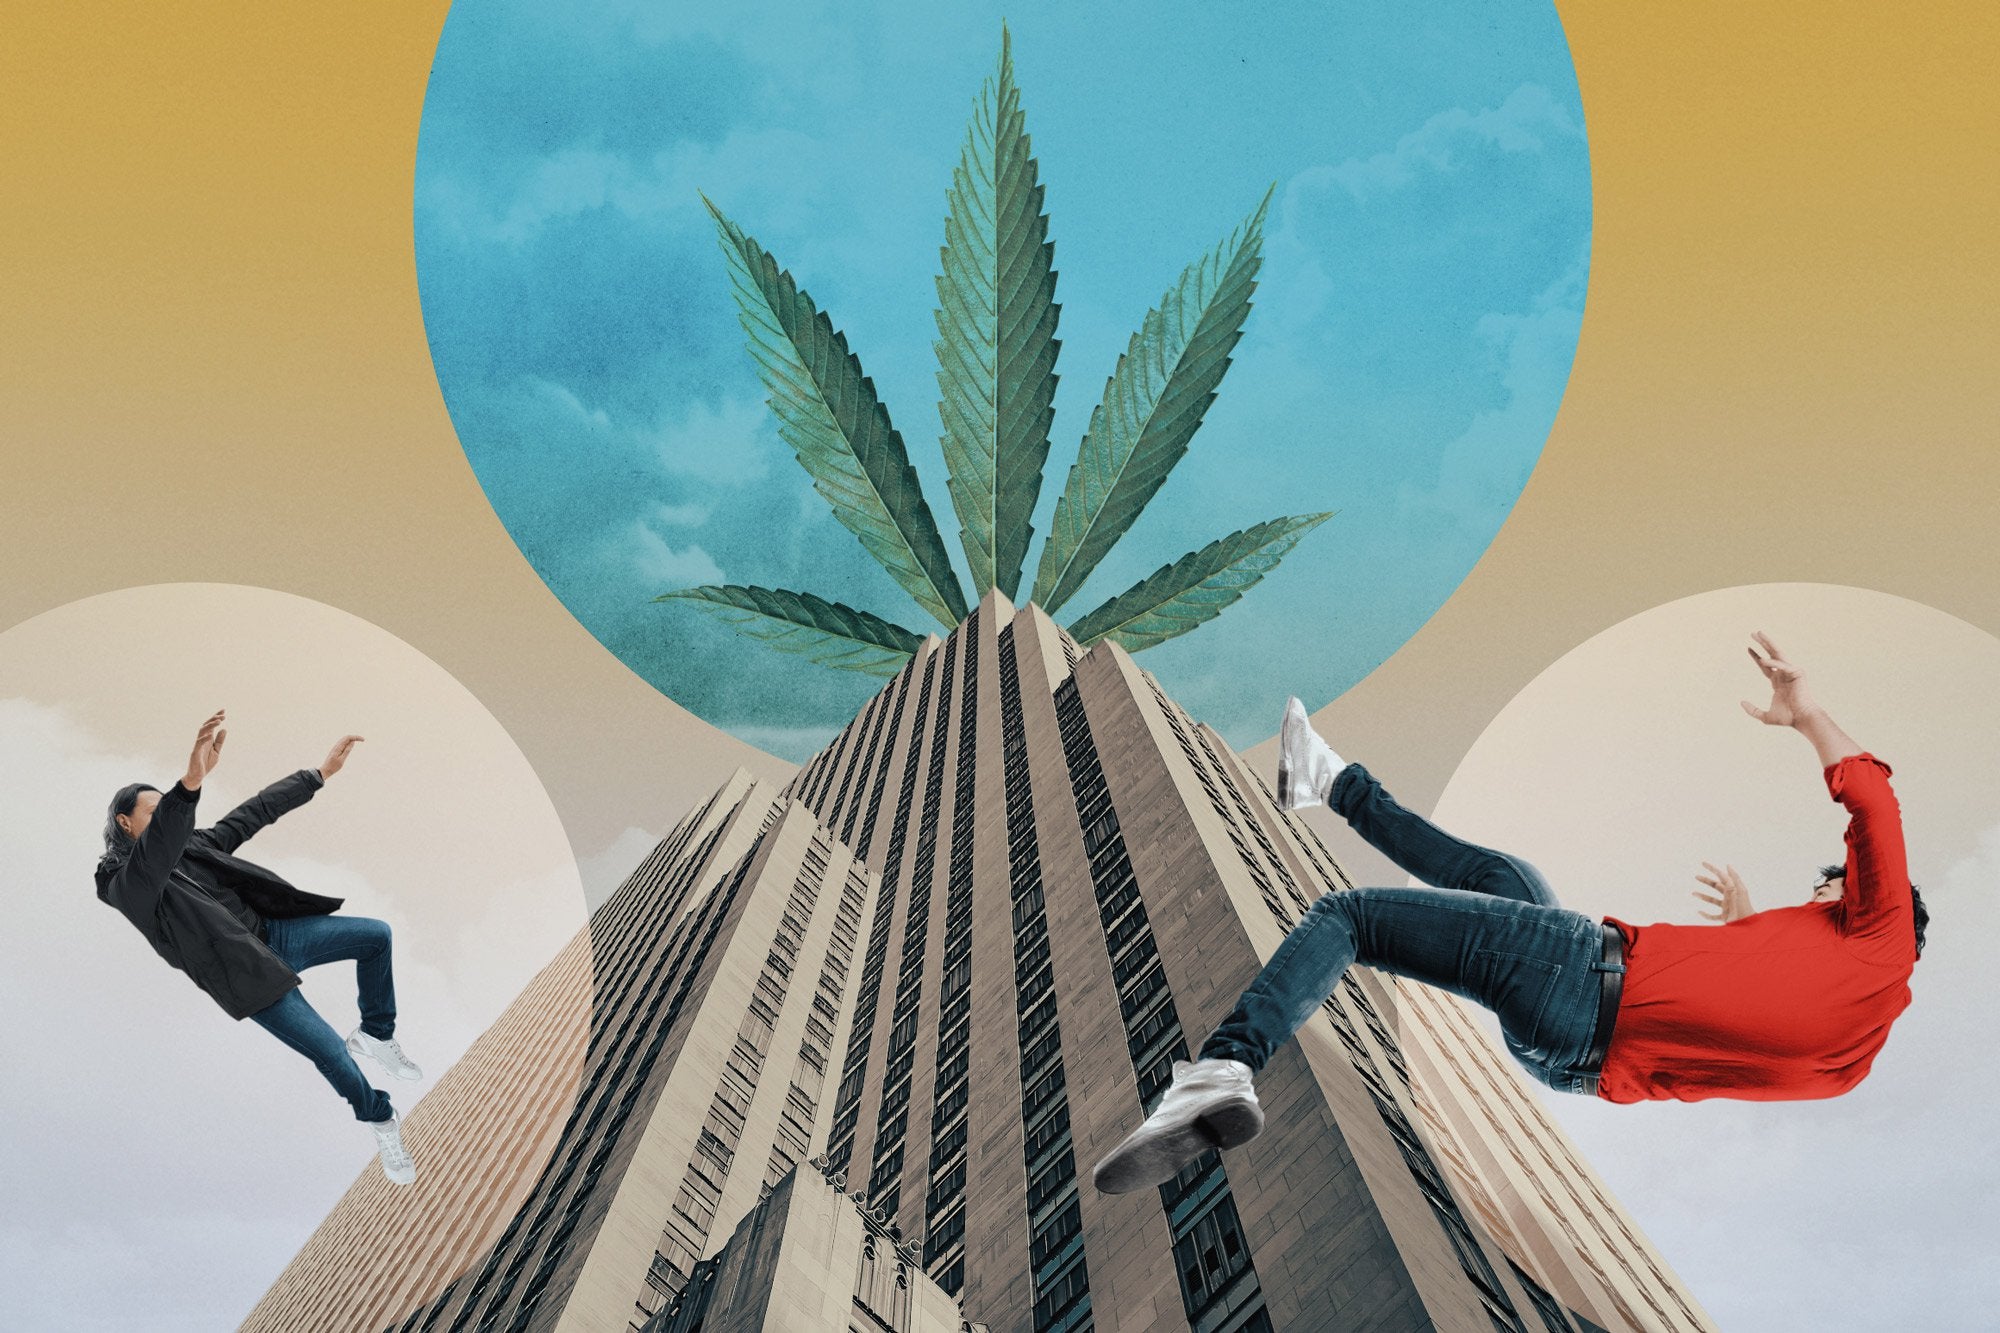 Lavish Parties, Greedy Pols and Panic Rooms: How the ‘Apple of Pot’ Collapsed